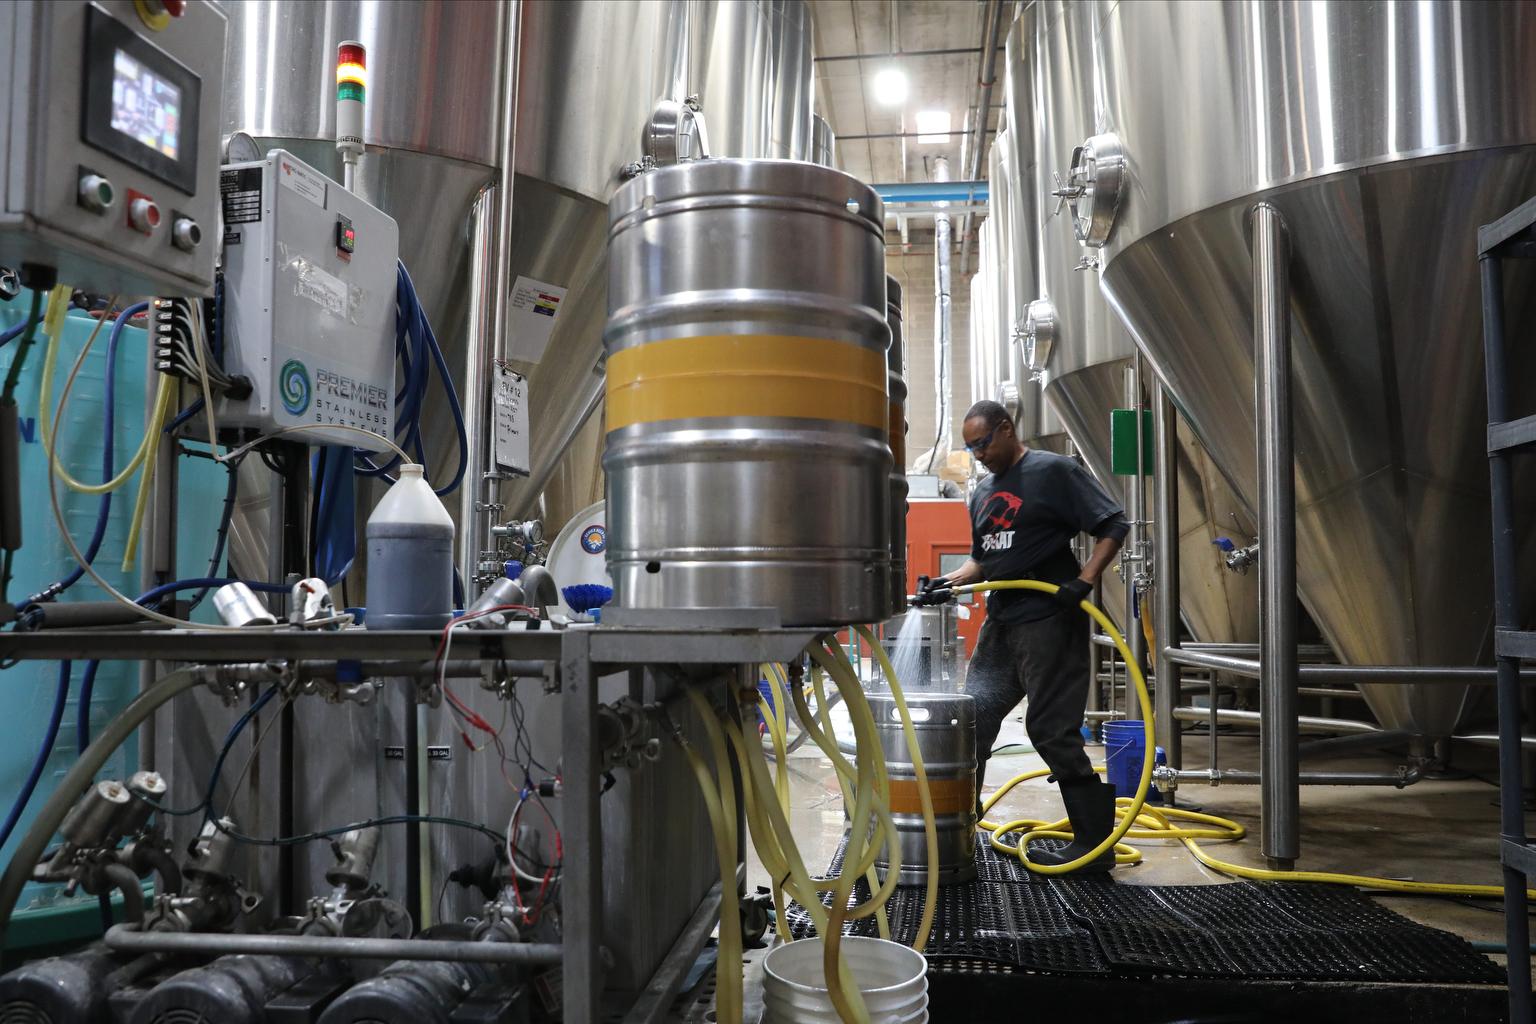 Denver Beer Co’s Carbon Dioxide Boosts Plant Growth At The Clinic’s Marijuana Growing Operation